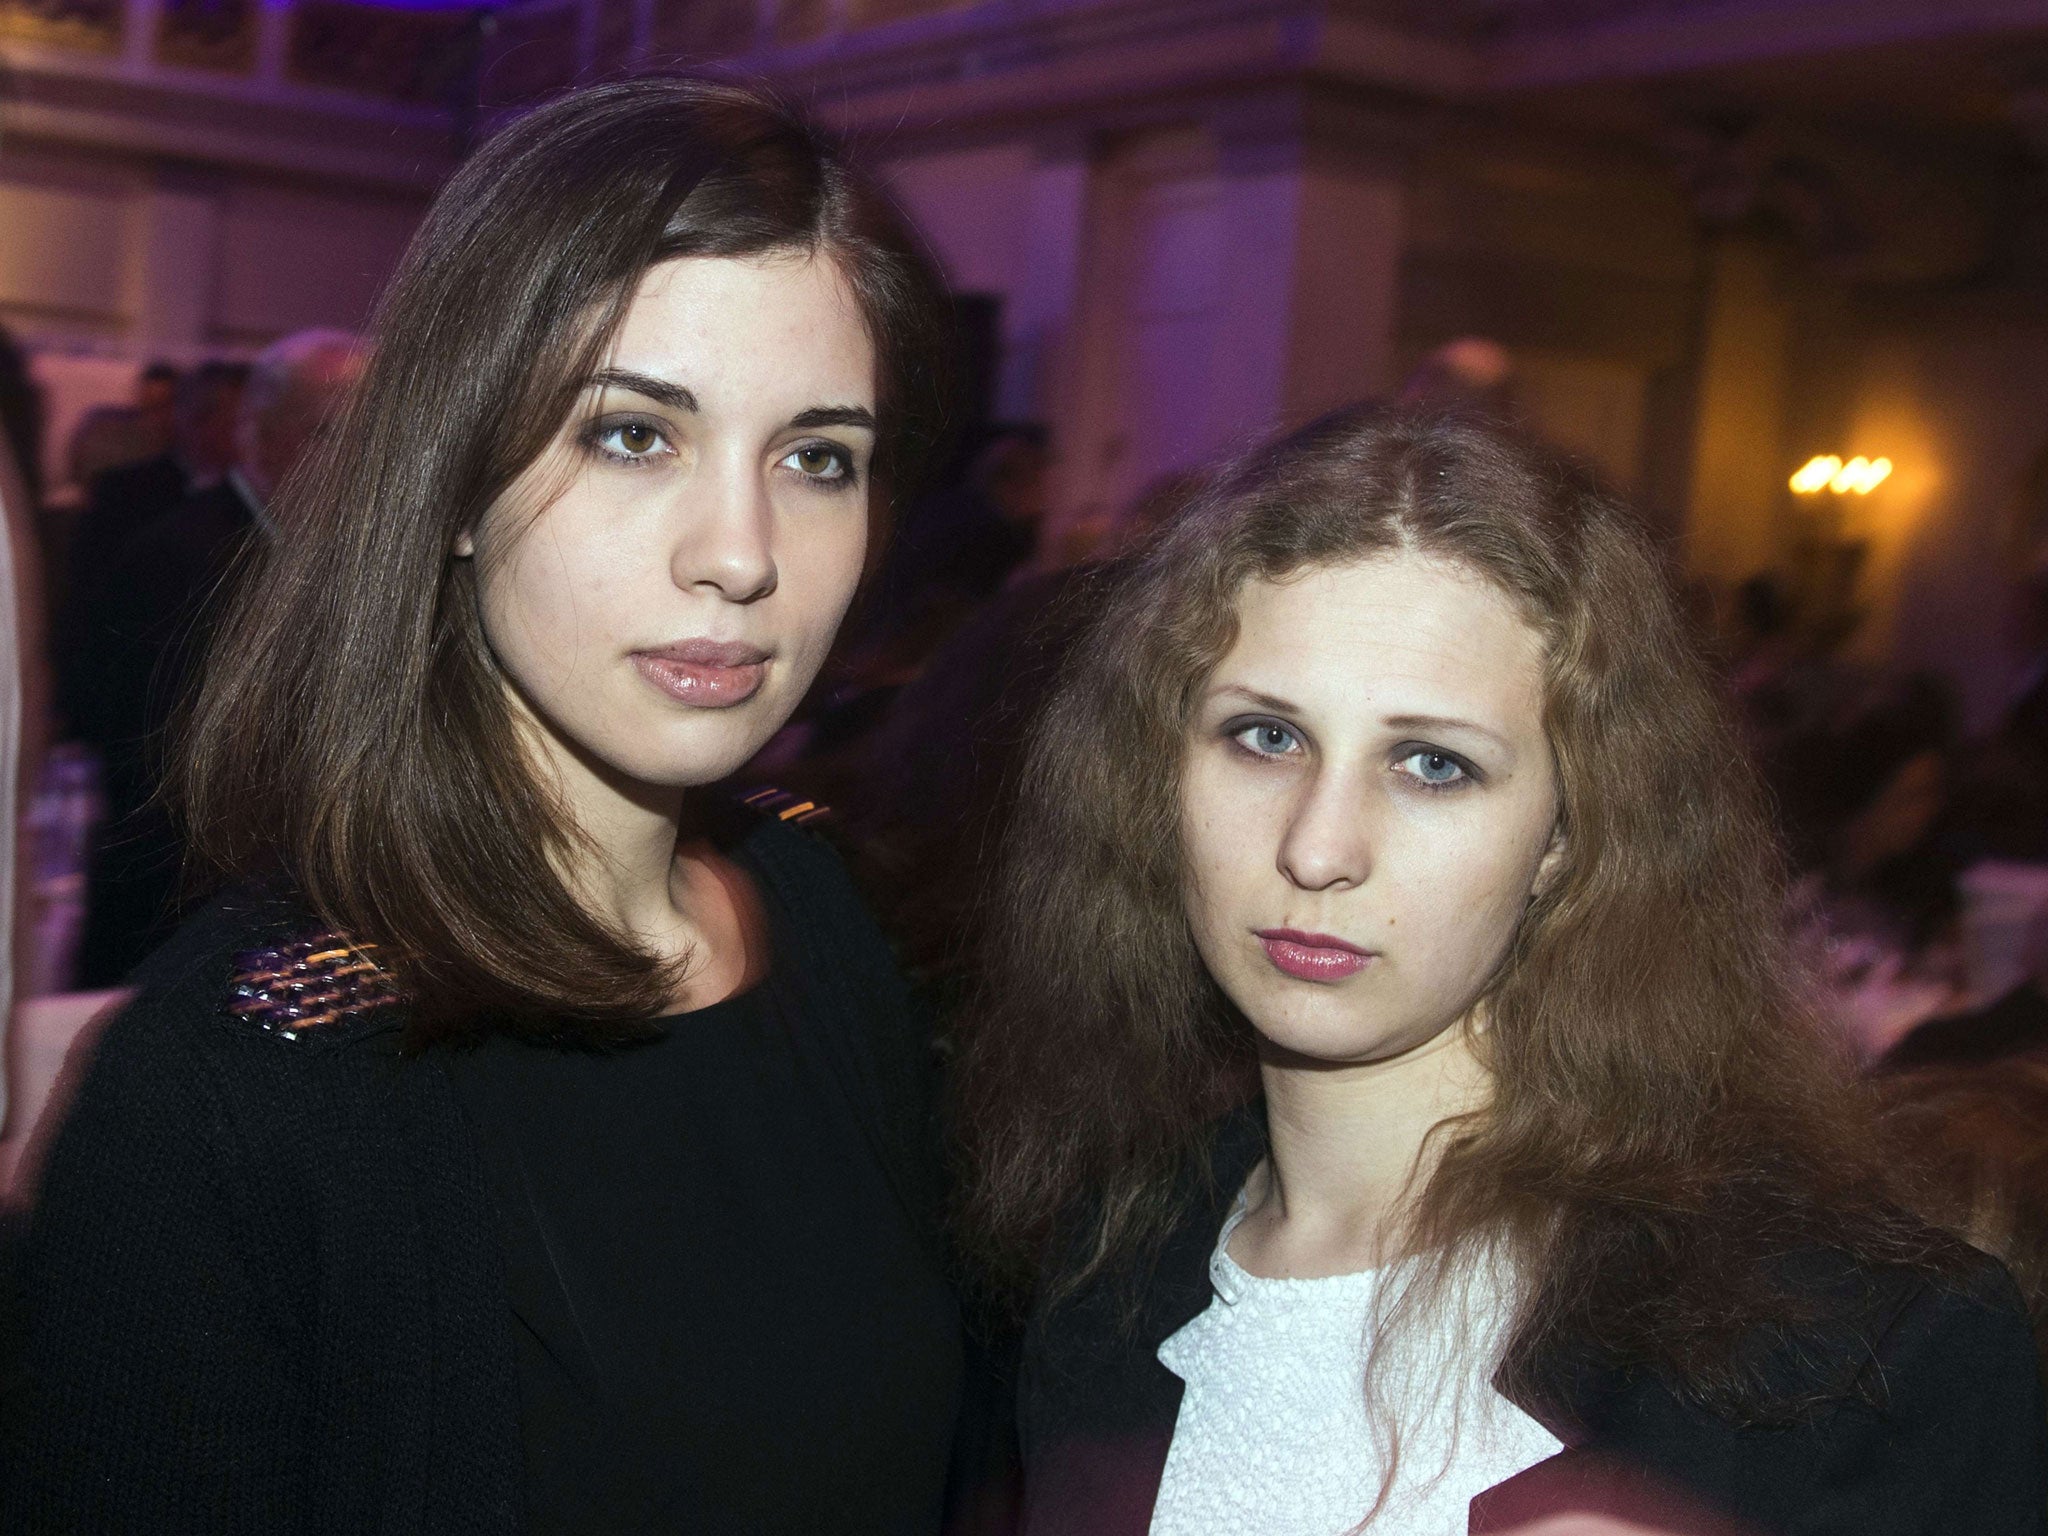 Nadezhda Tolokonnikova (L) and Maria Alyokhina of the Russian punk protest group Pussy Riot arriving for the Cinema for Peace gala in Berlin, 2014